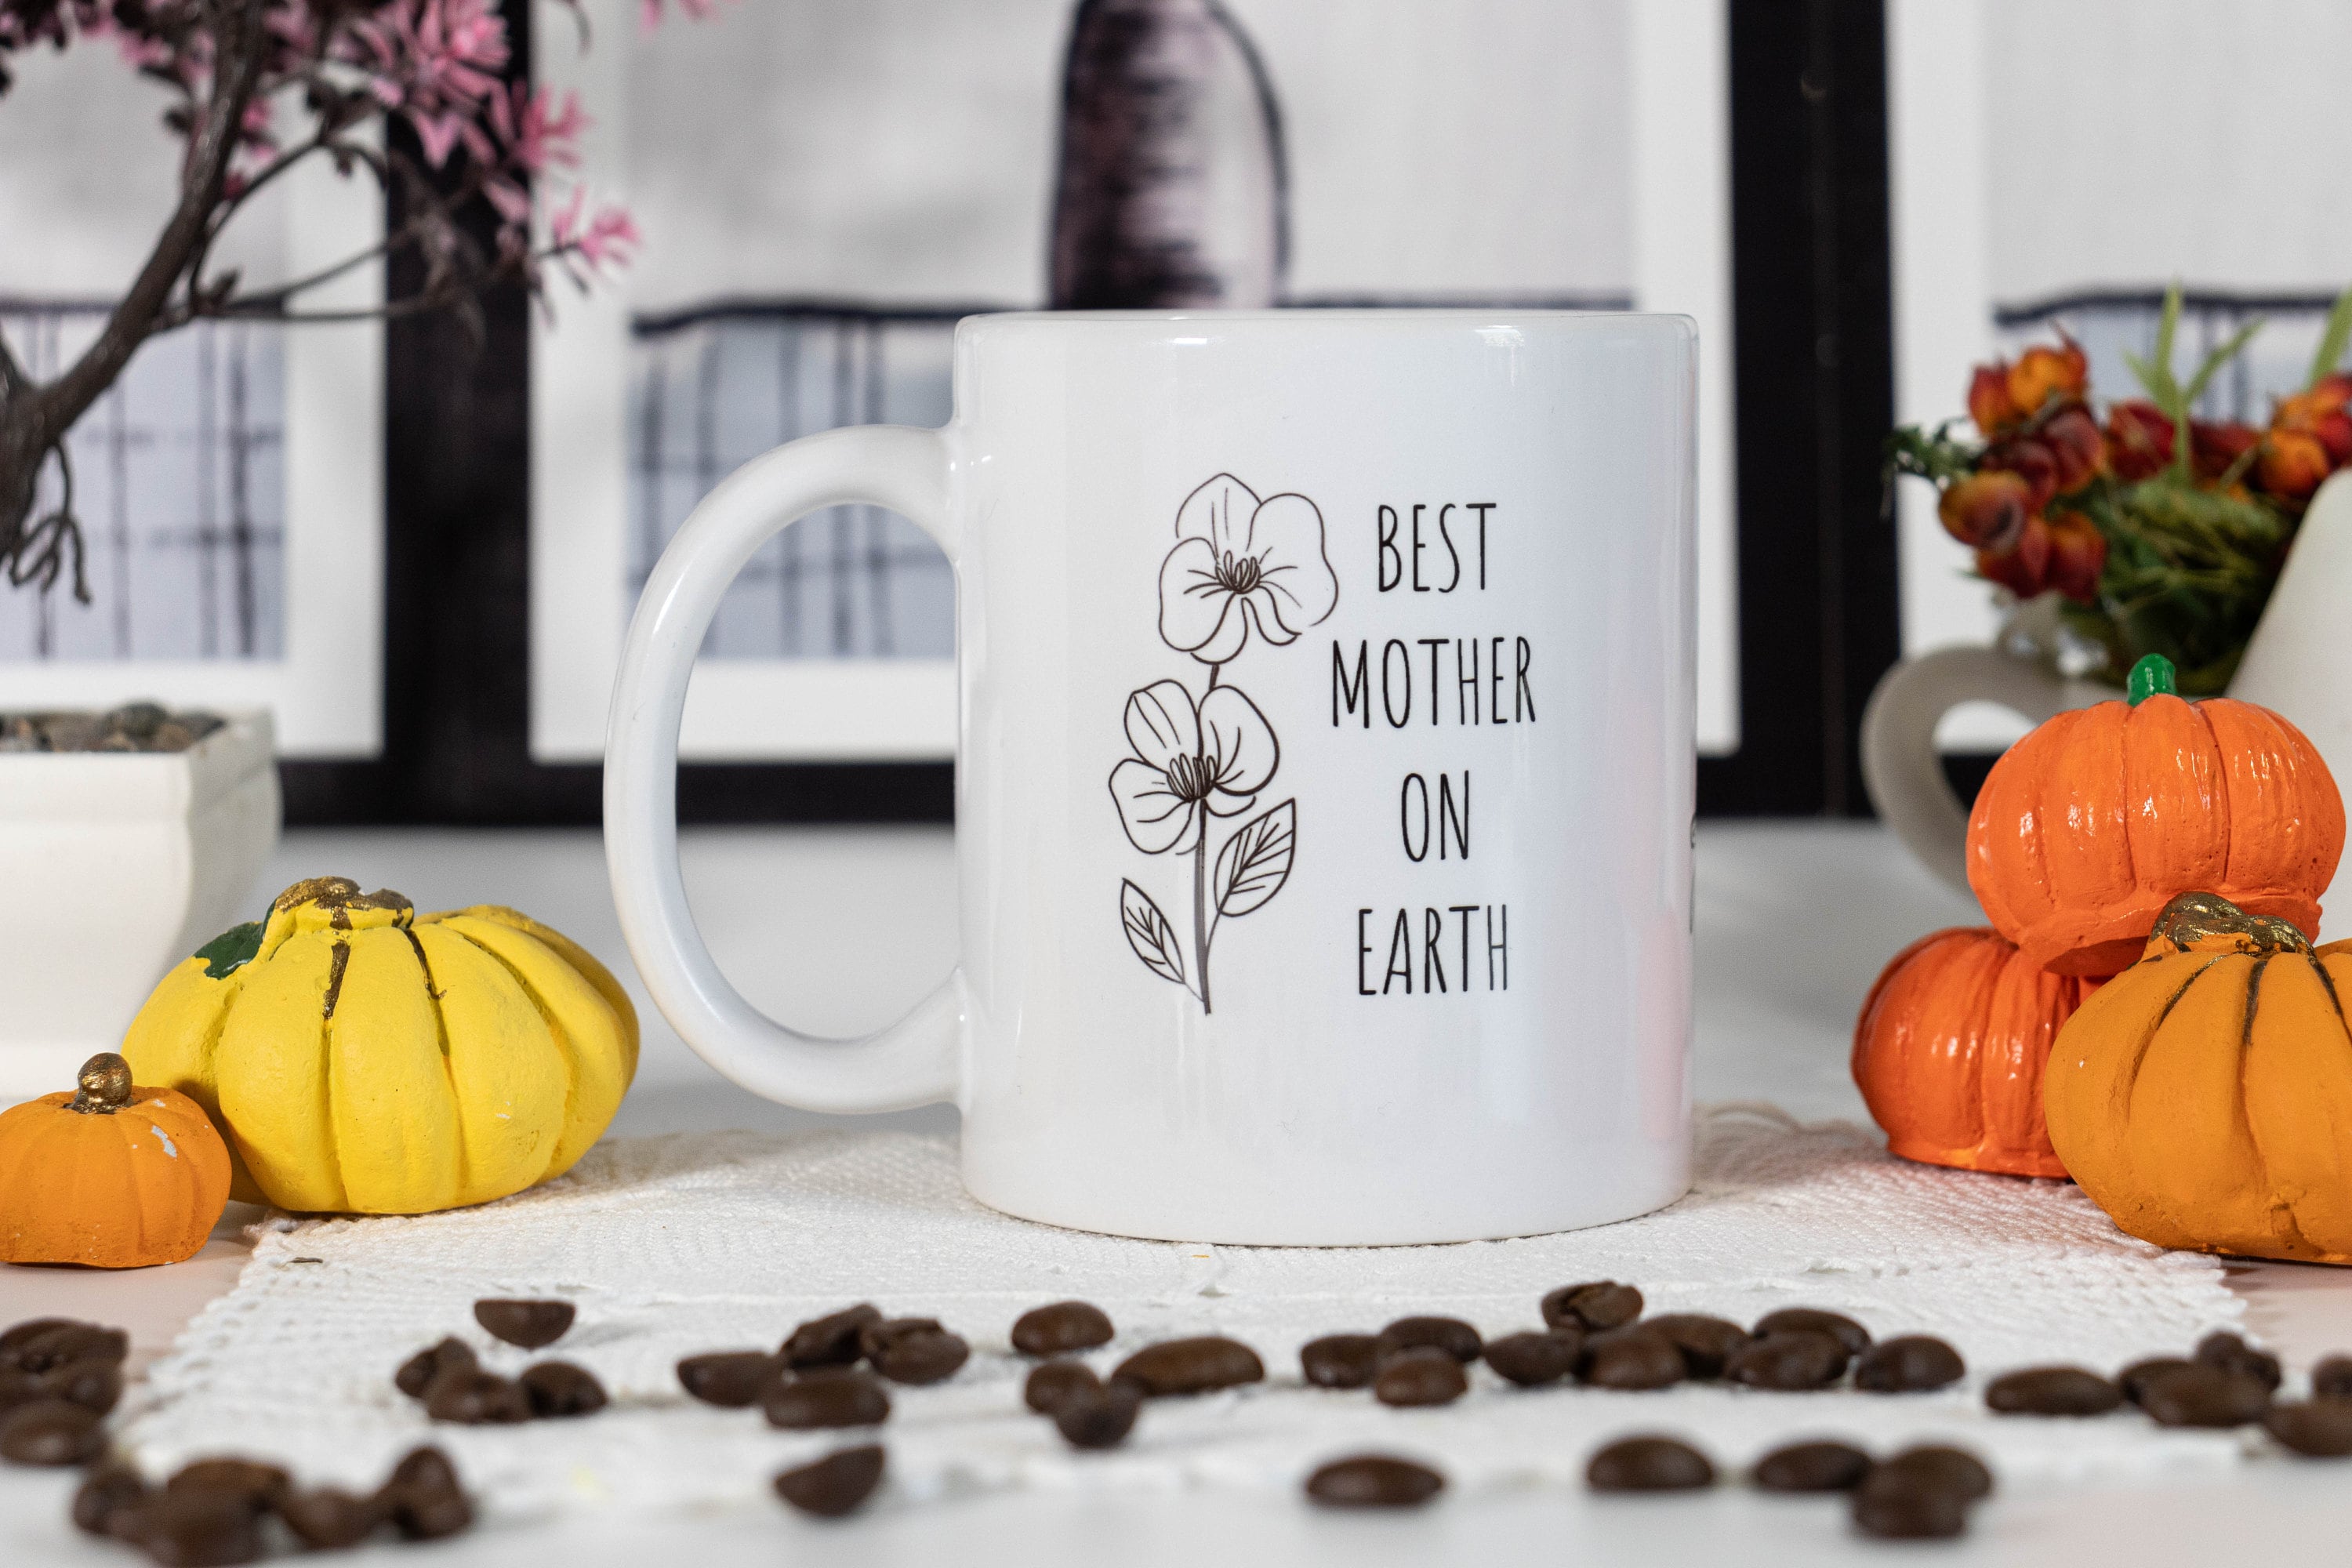 BEST MOTHER on EARTH! - Coffee Mug for Mother's day